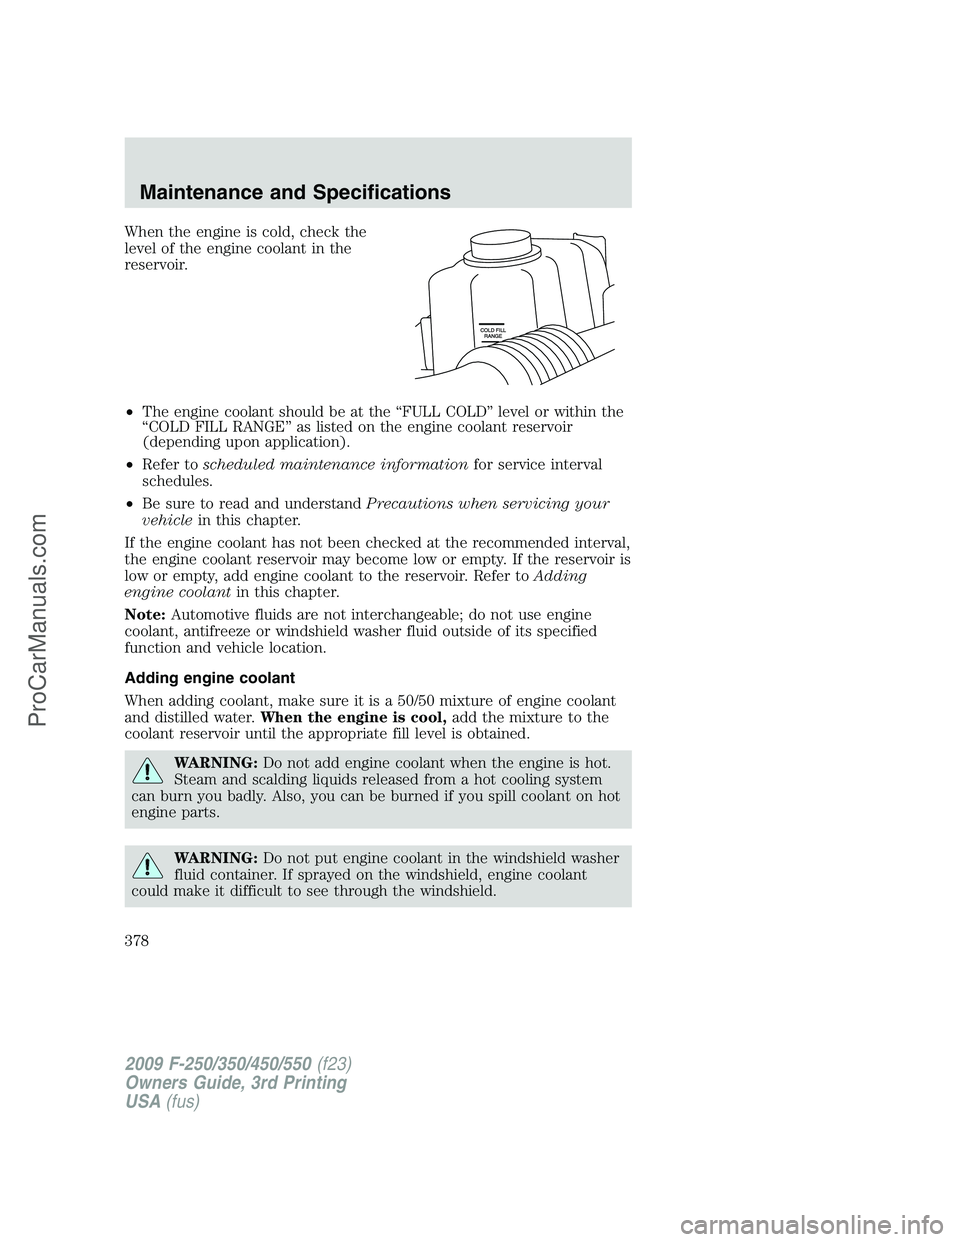 FORD F350 2009  Owners Manual When the engine is cold, check the
level of the engine coolant in the
reservoir.
•The engine coolant should be at the “FULL COLD” level or within the
“COLD FILL RANGE” as listed on the engin